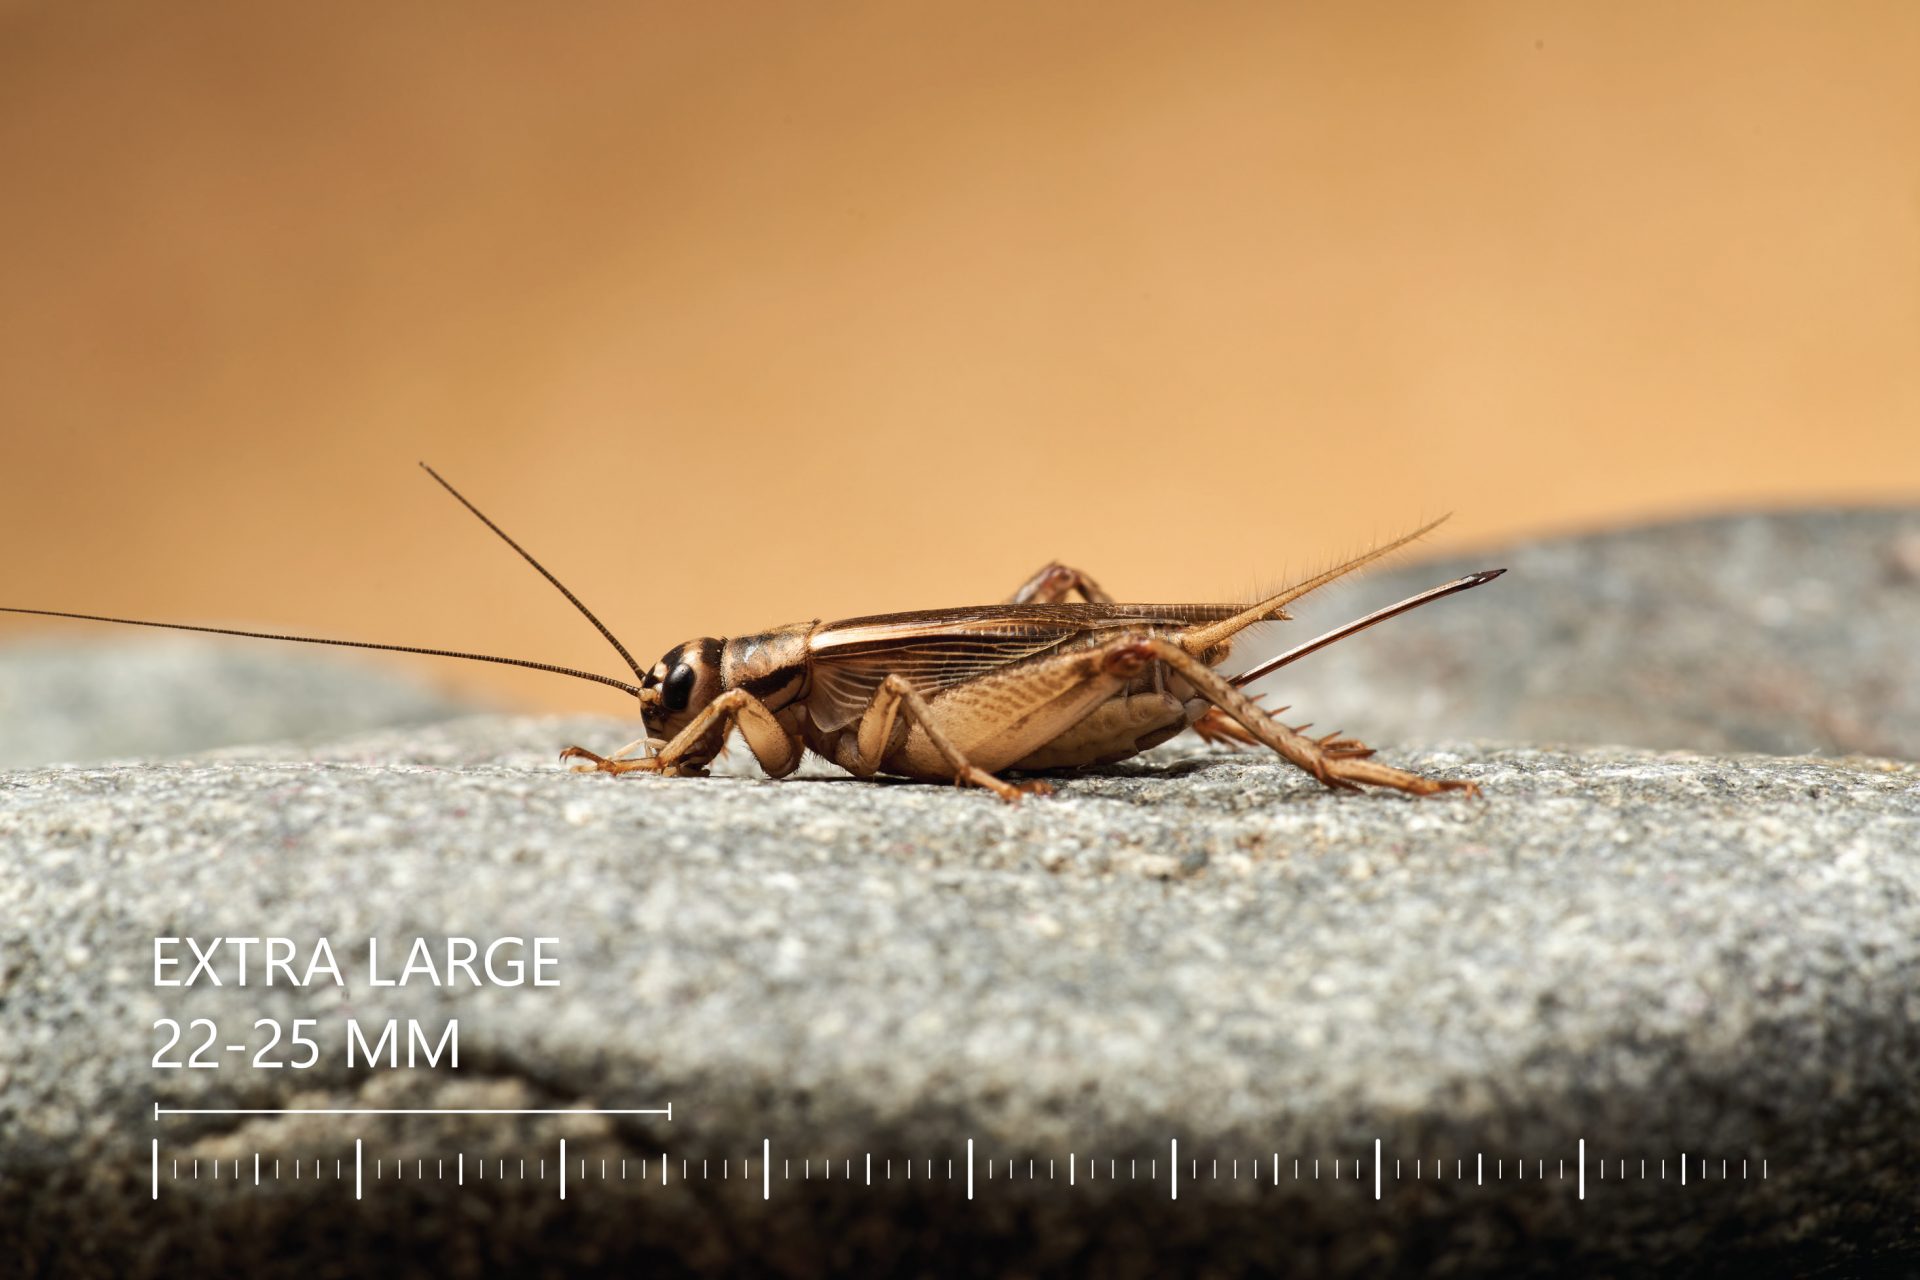 Premium Crickets - Live Insects Delivered Straight To Your Door!